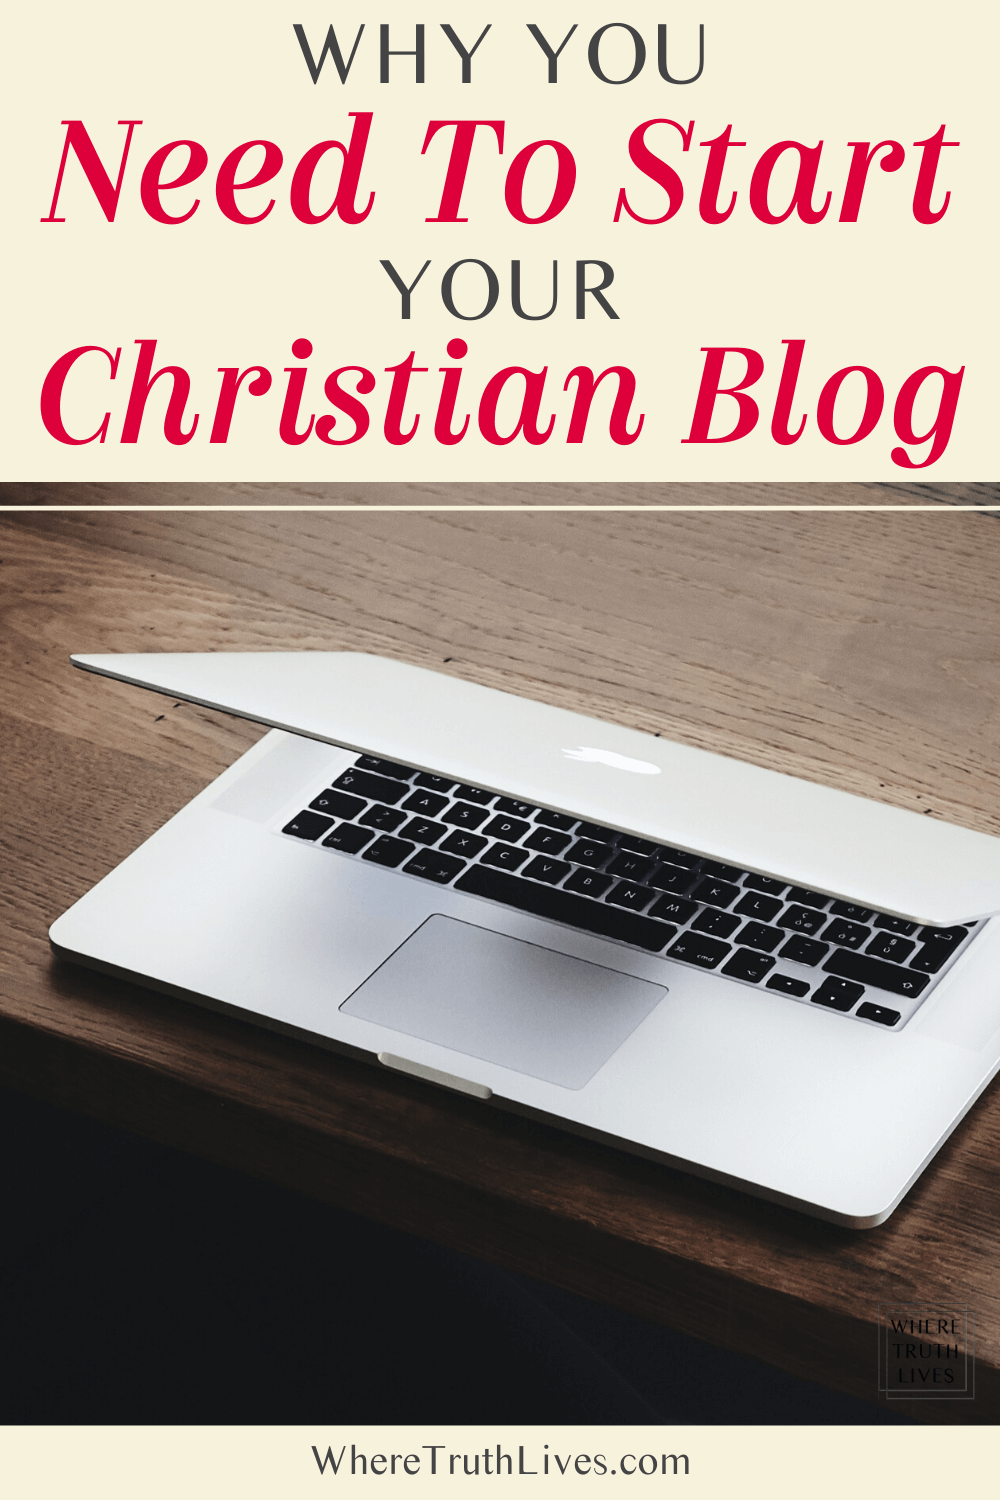 Your life - and your blog - is for a purpose much bigger than you can see. Here are 3 reasons why you need to start your Christian blog - today! | Where Truth Lives .com